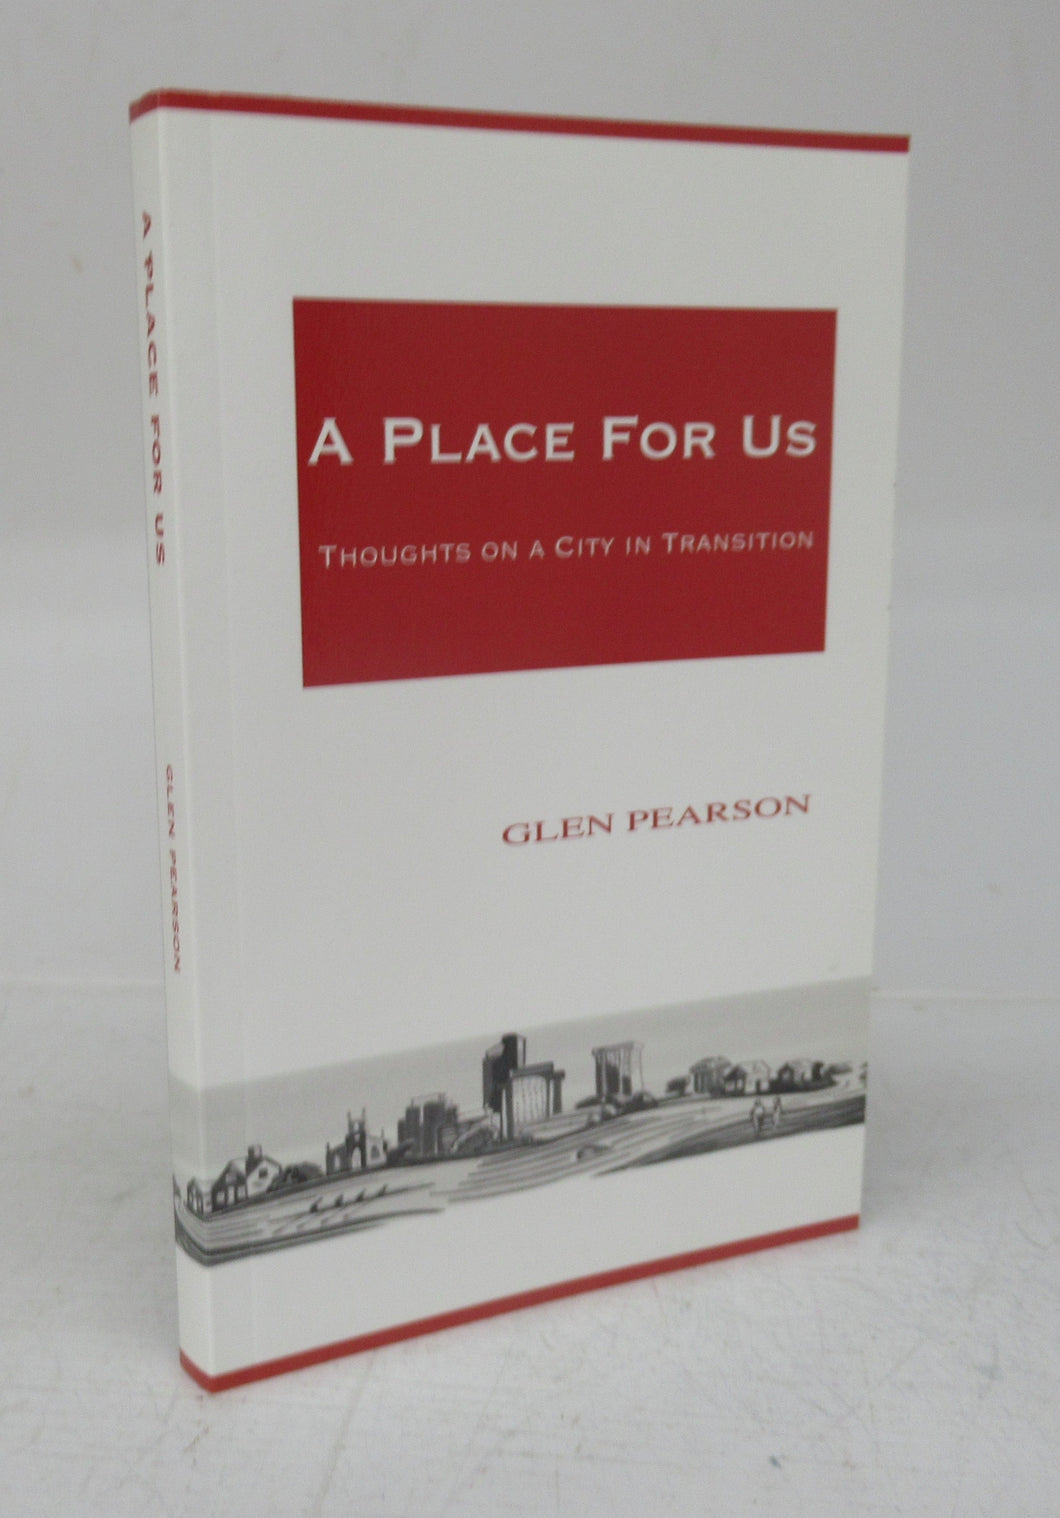 A Place For Us: Thoughts on a City in Transition